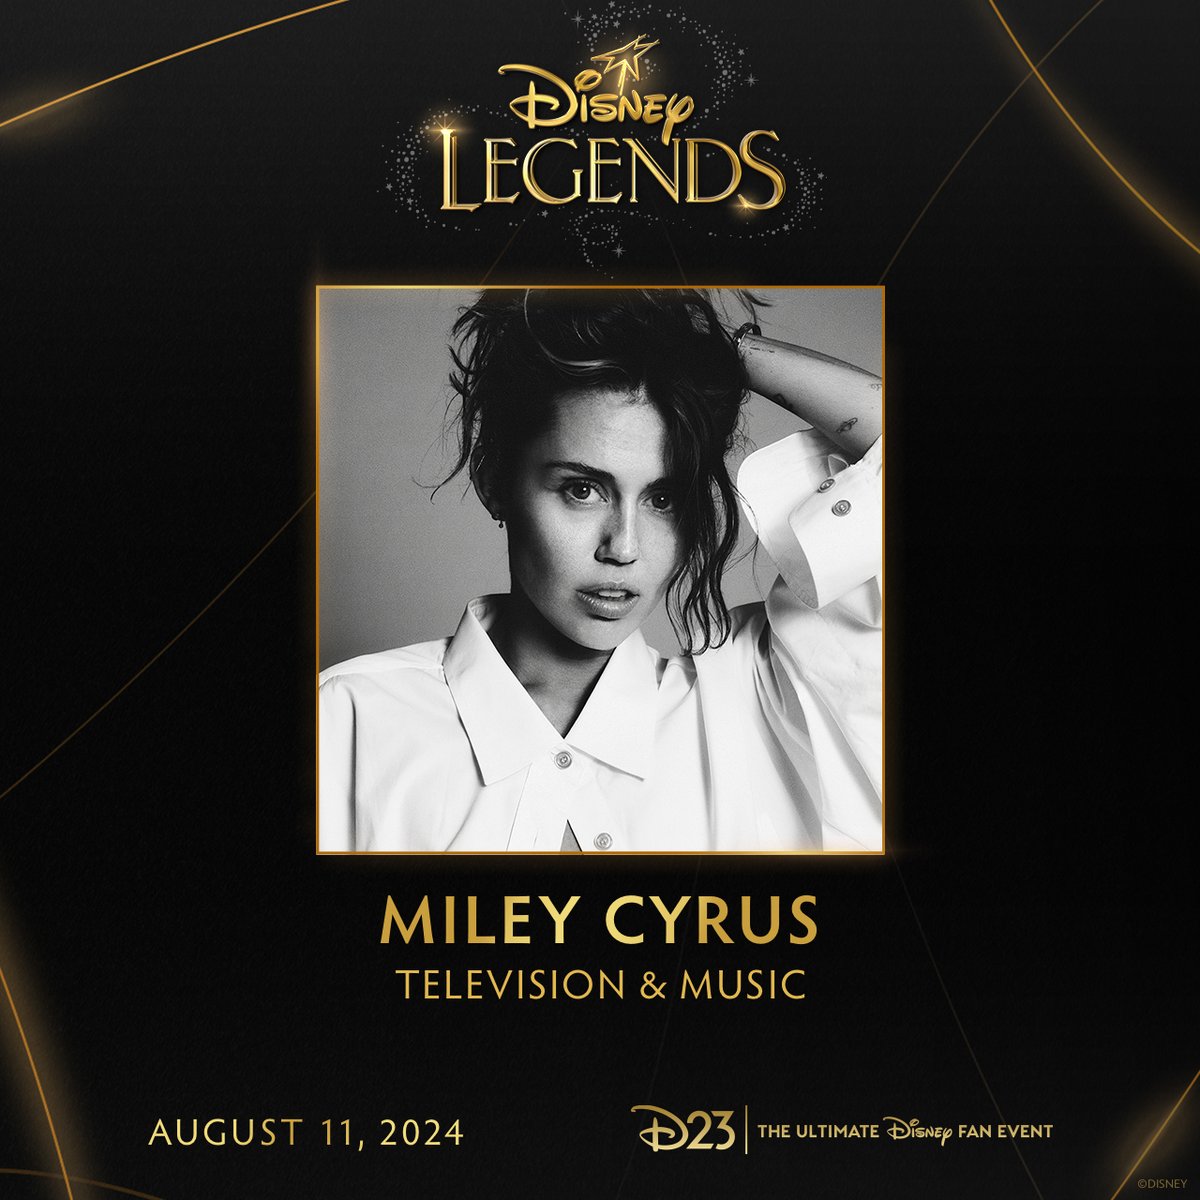 Congratulations to Miley Cyrus, who will be honored as a Disney Legend on Sunday, August 11 at D23: The Ultimate Disney Fan Event. #D23